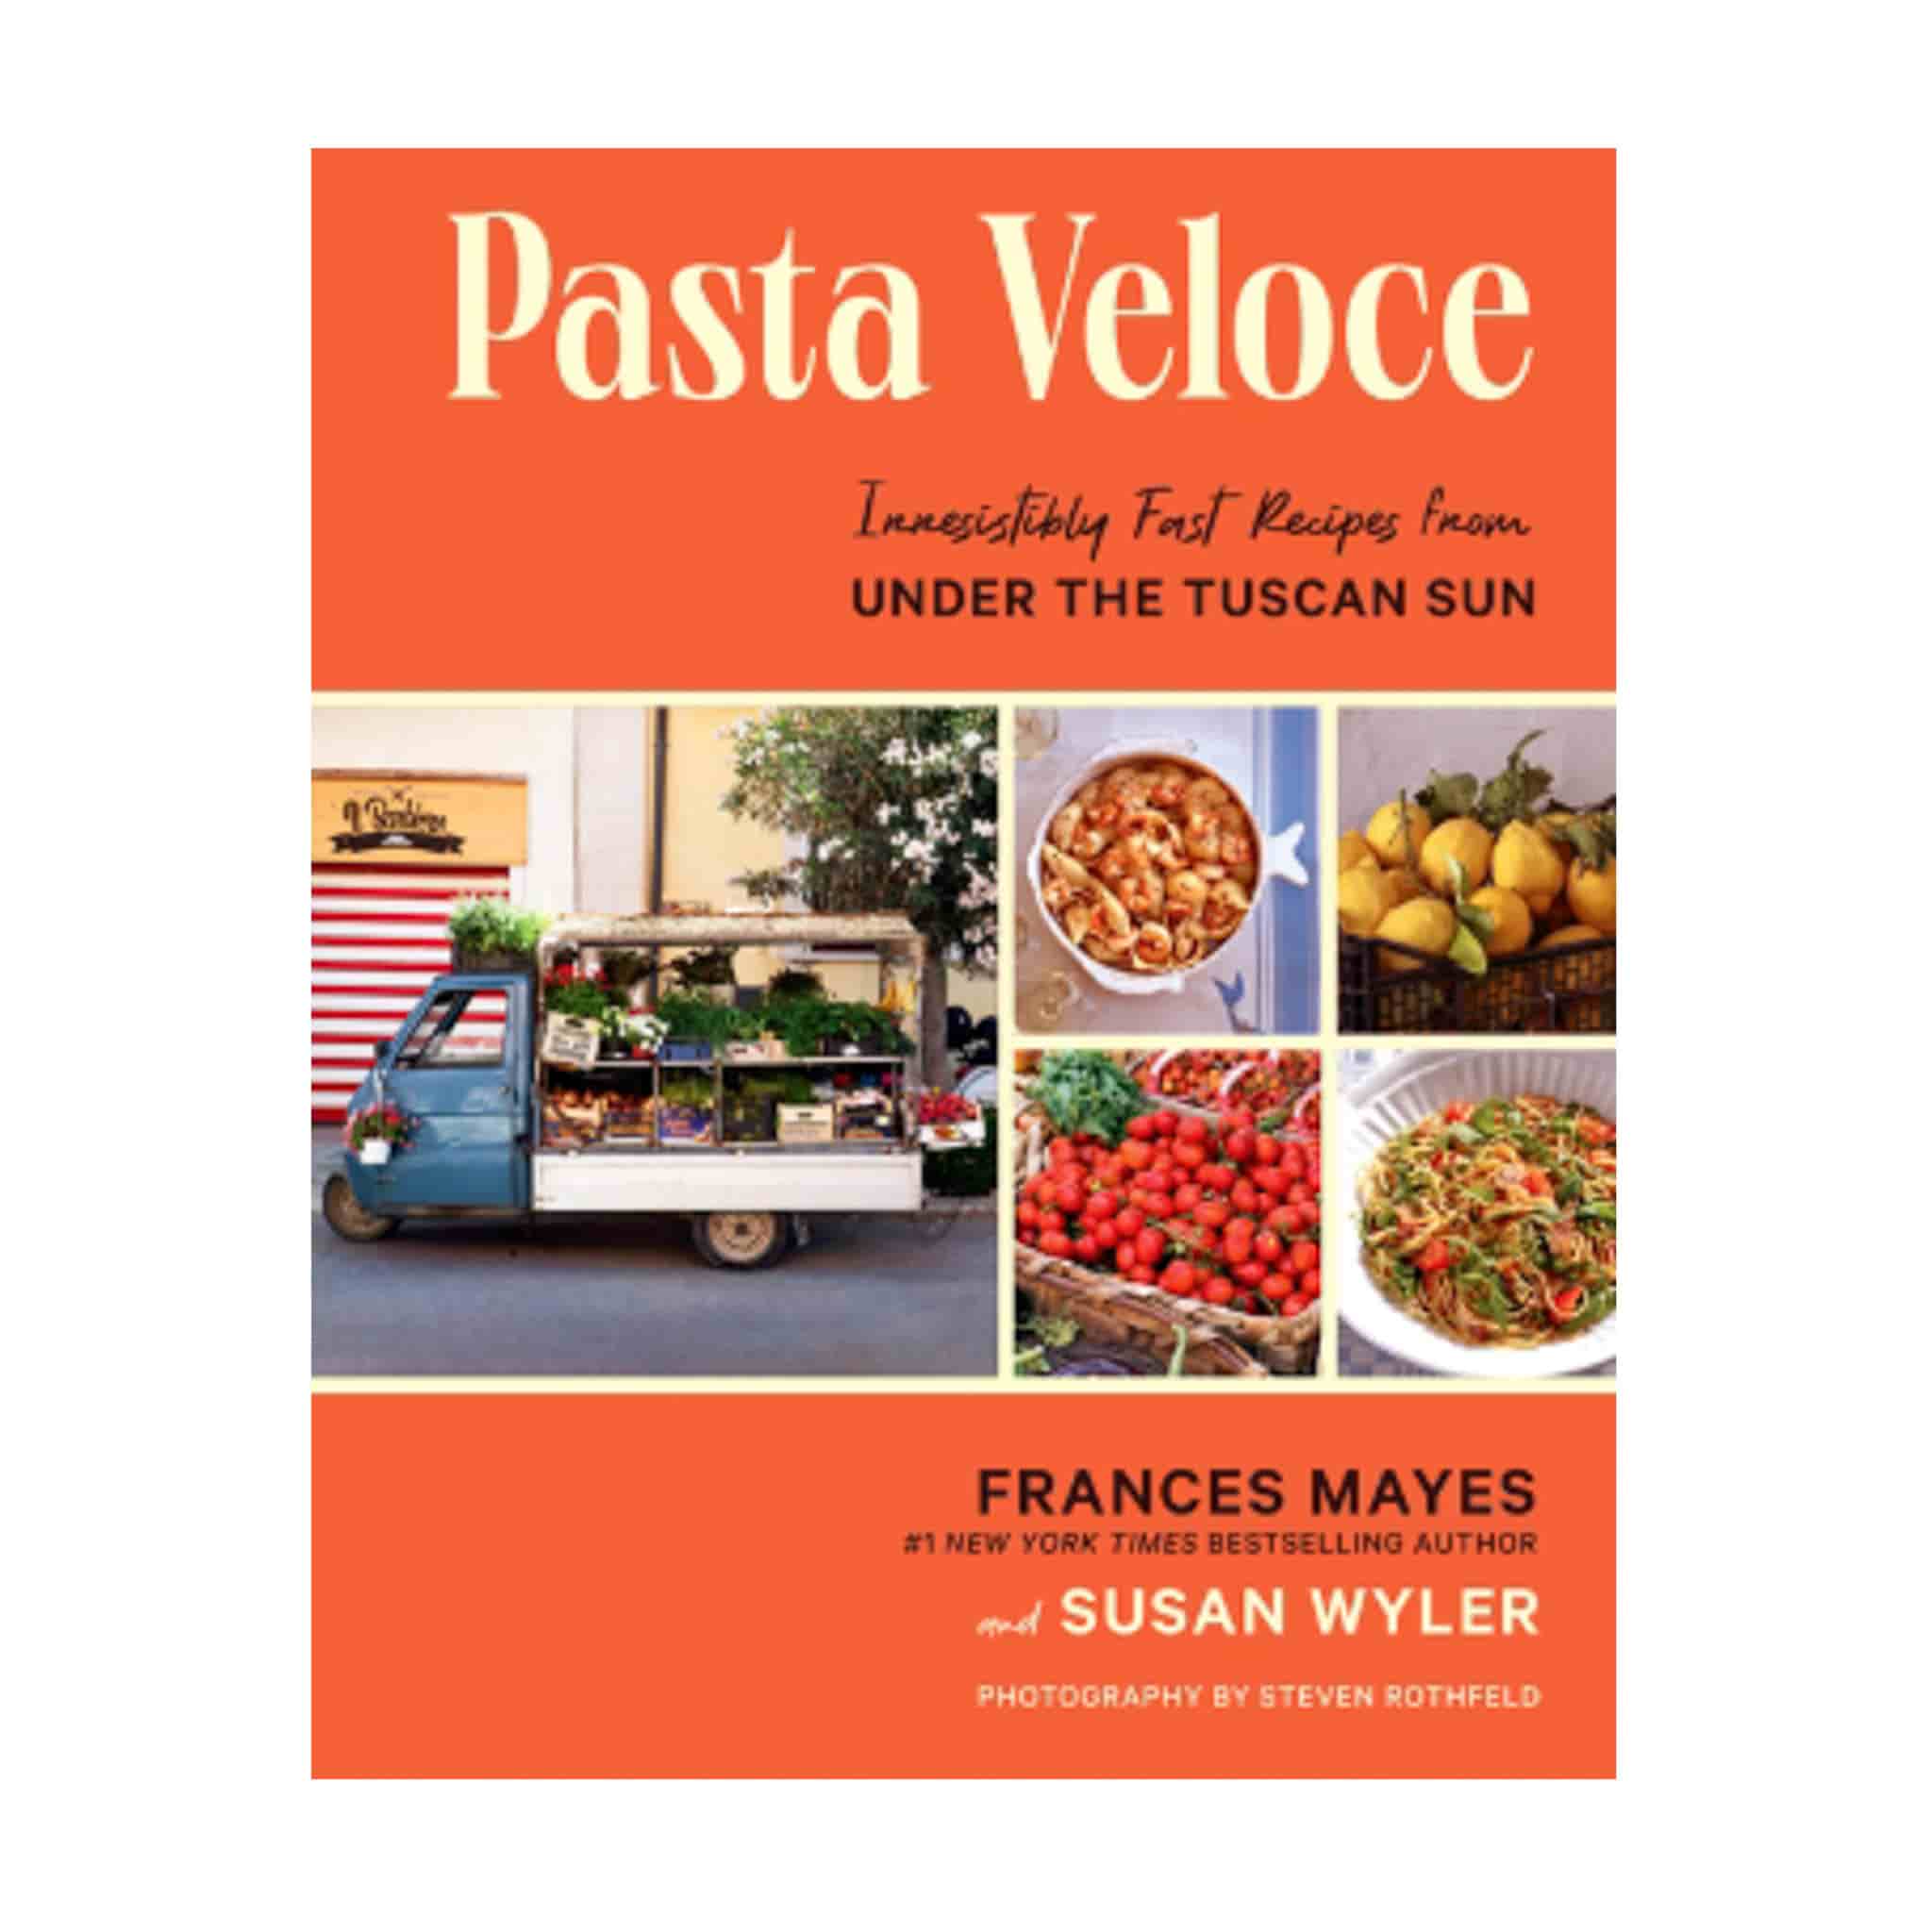 Pasta Veloce: Irresistibly Fast Recipes from Under the Tuscan Sun, by Frances Mayes